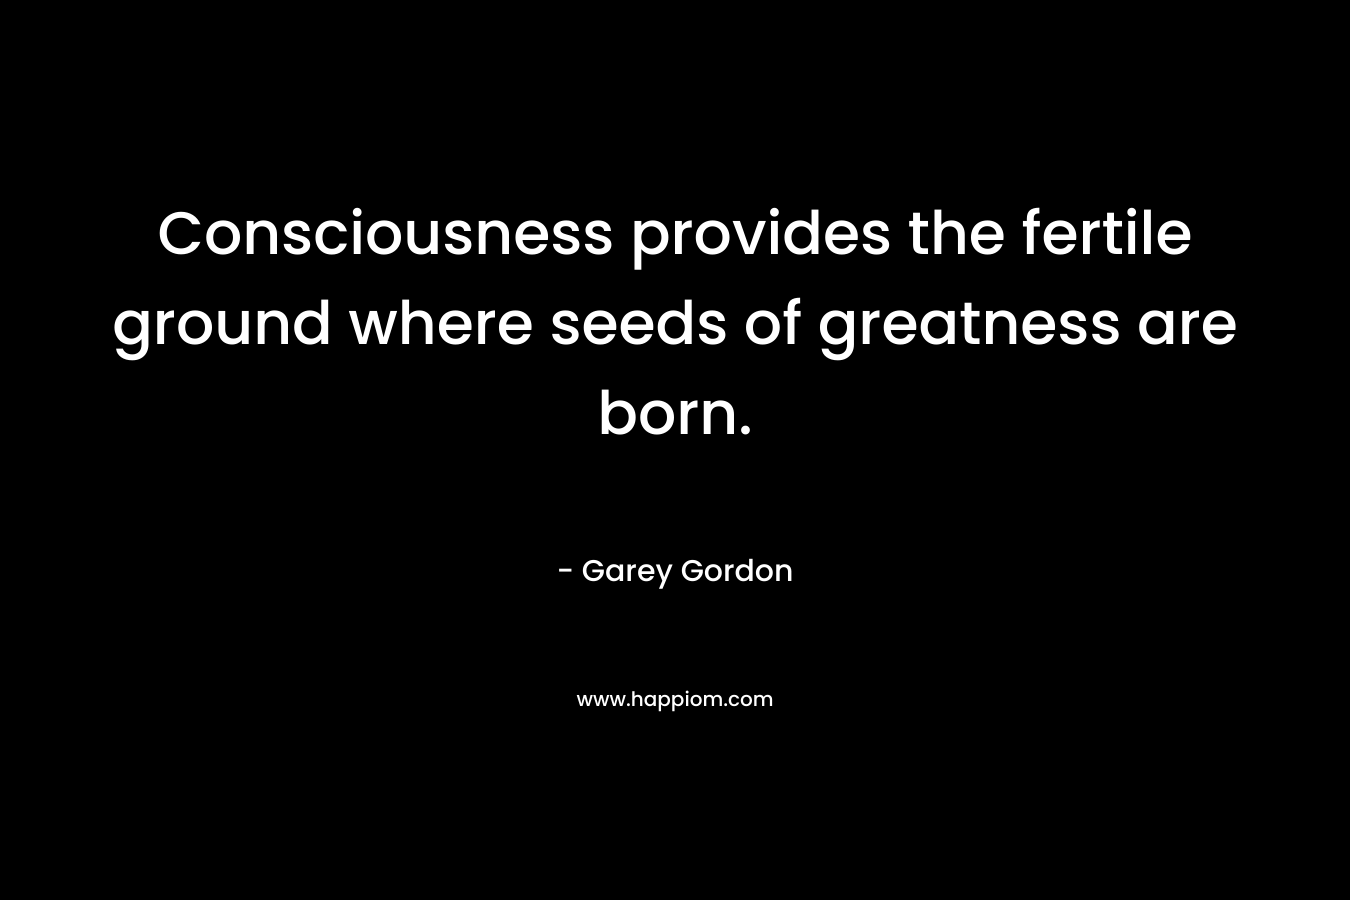 Consciousness provides the fertile ground where seeds of greatness are born.